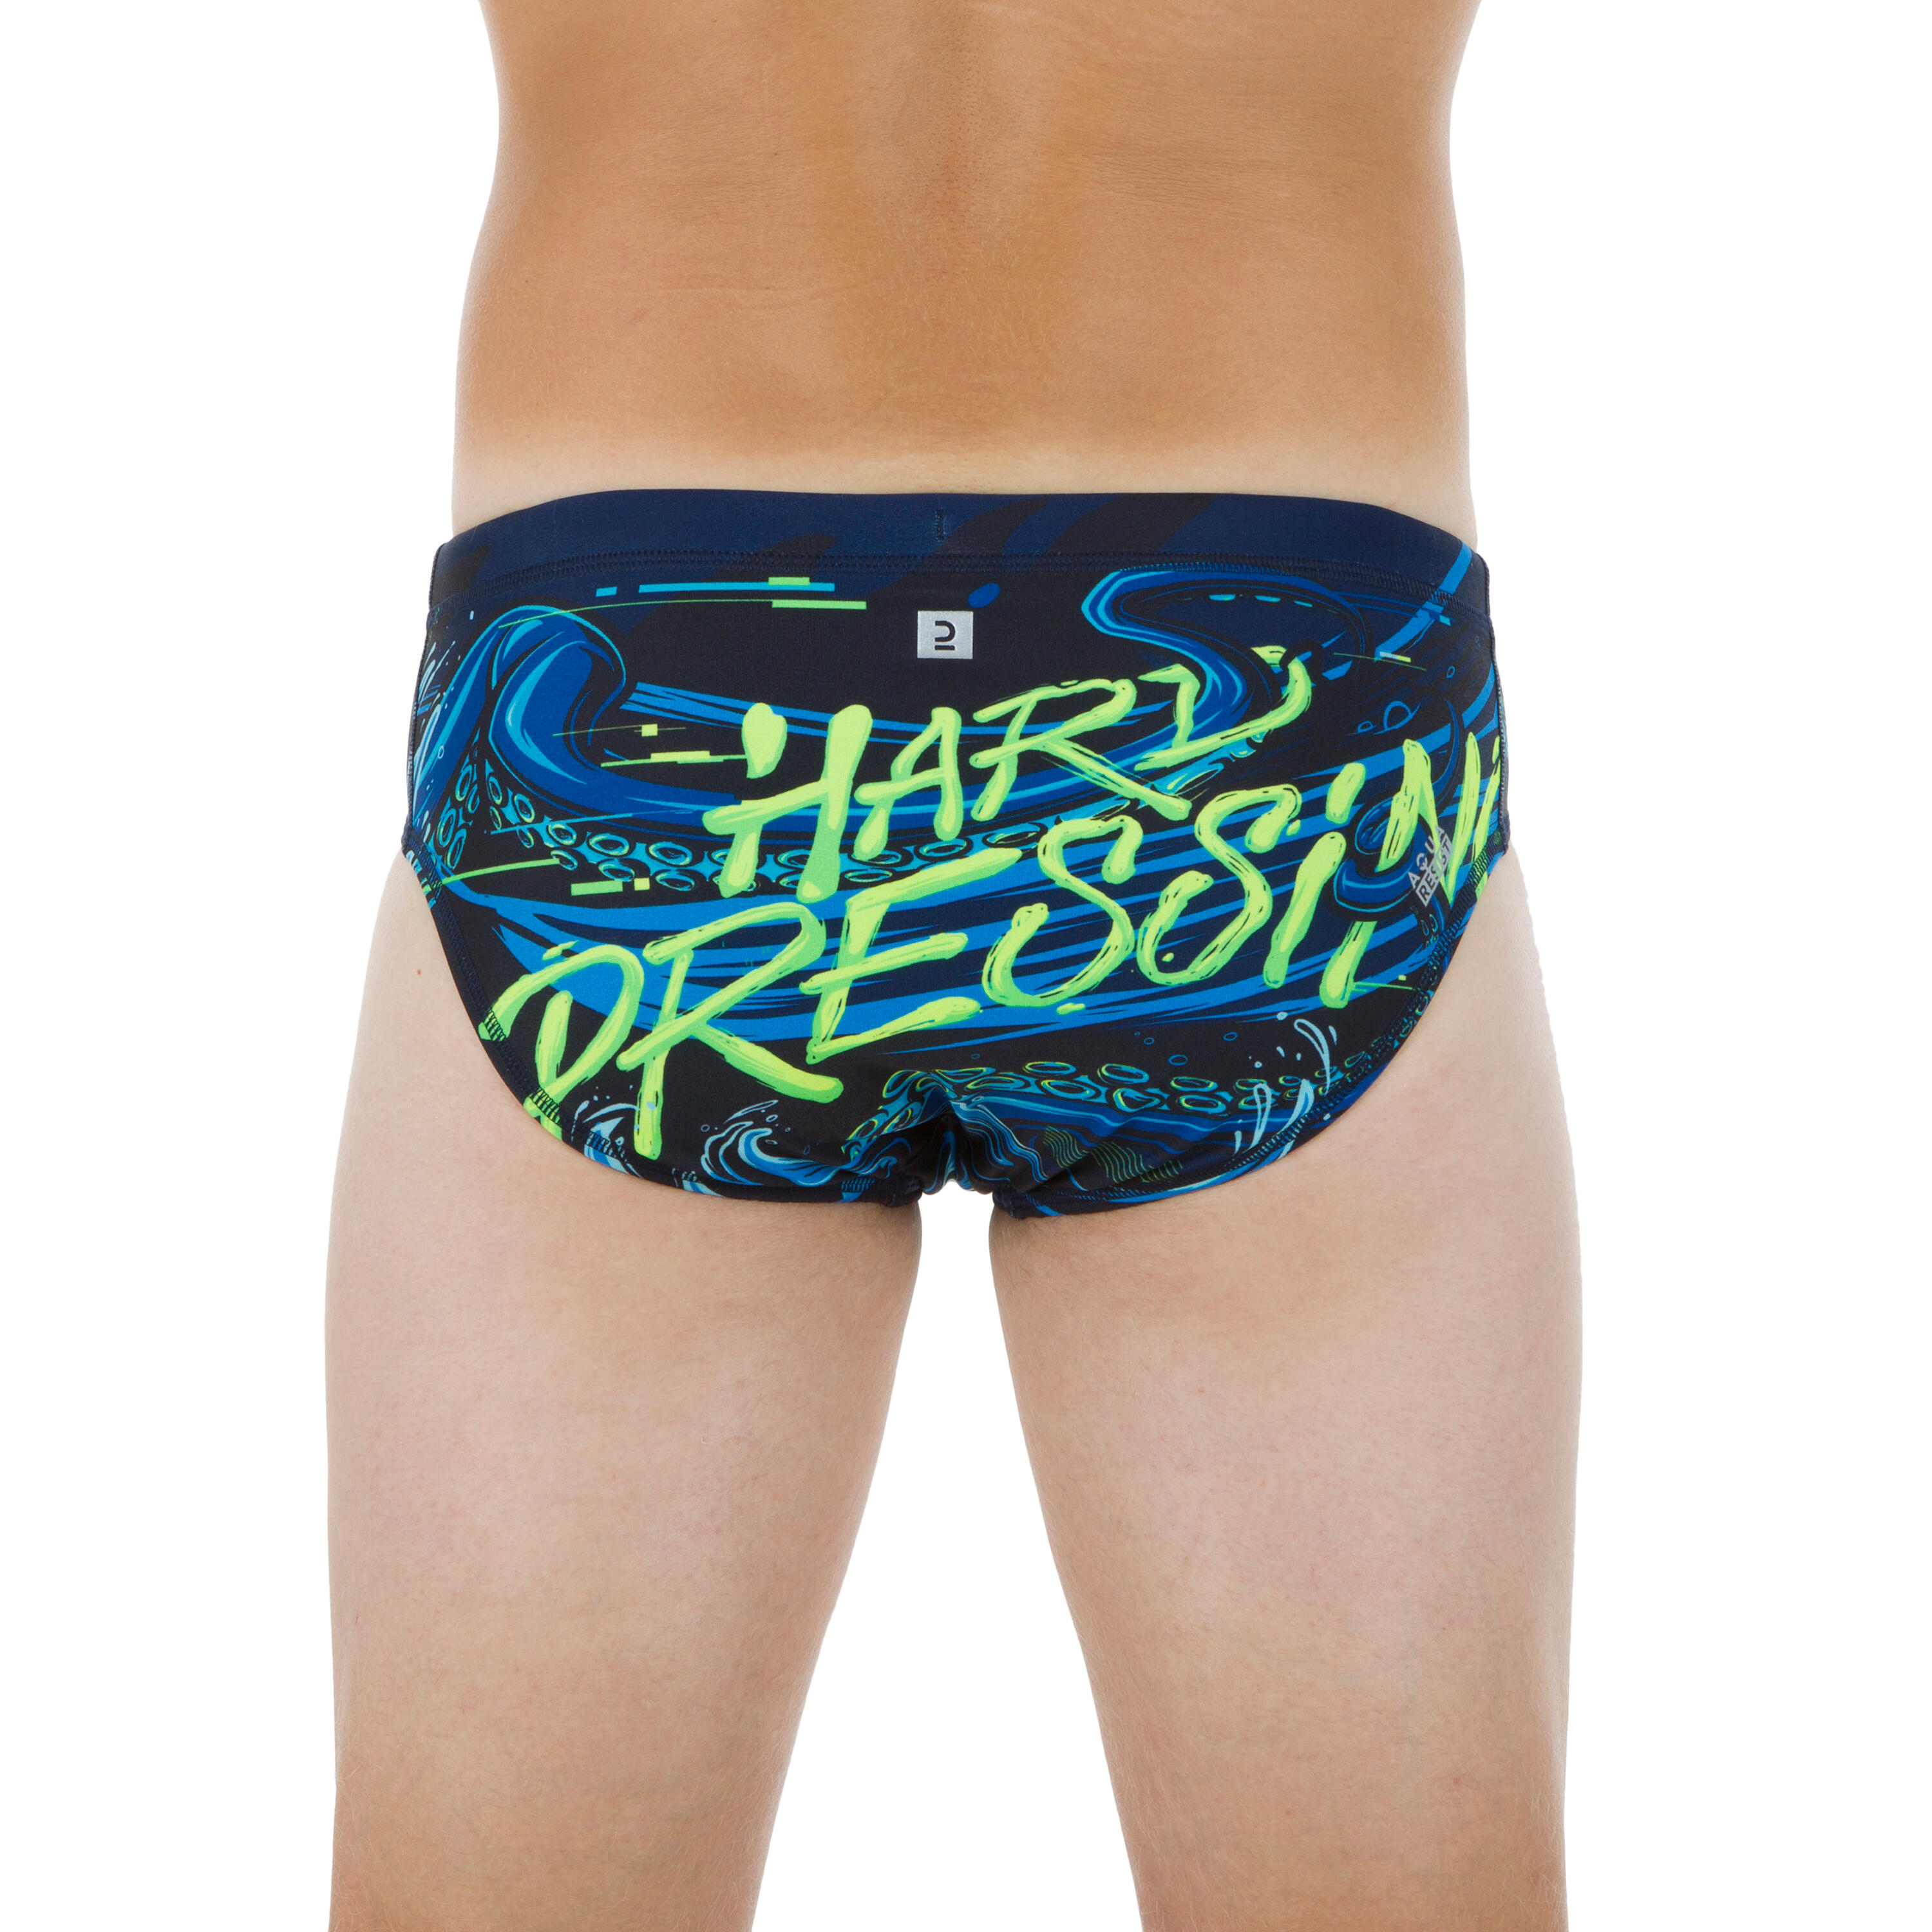 MEN'S WATER POLO SWIMMING BRIEFS - OCTOPUS BLUE 3/5